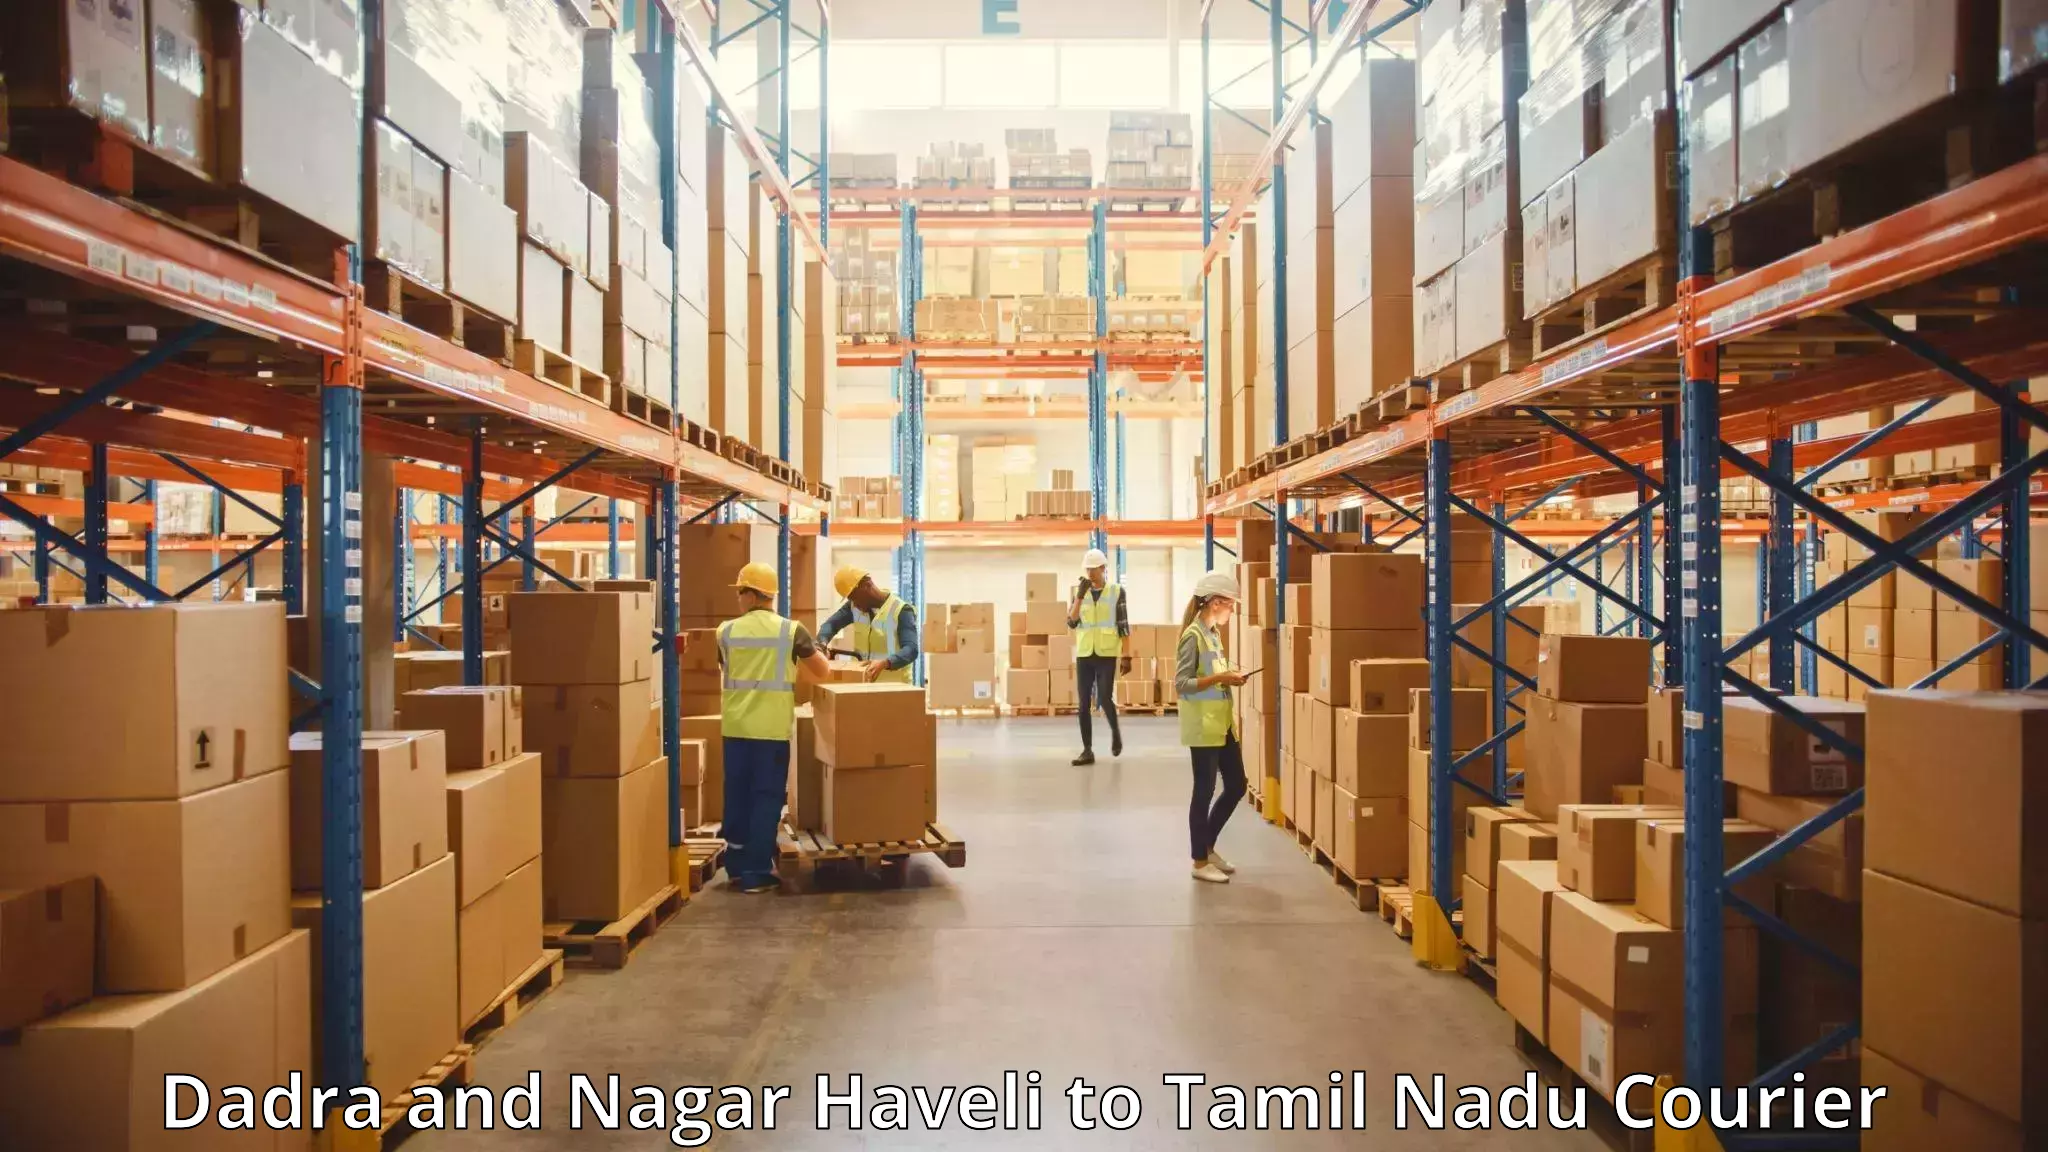 Luggage delivery system Dadra and Nagar Haveli to Sivakasi